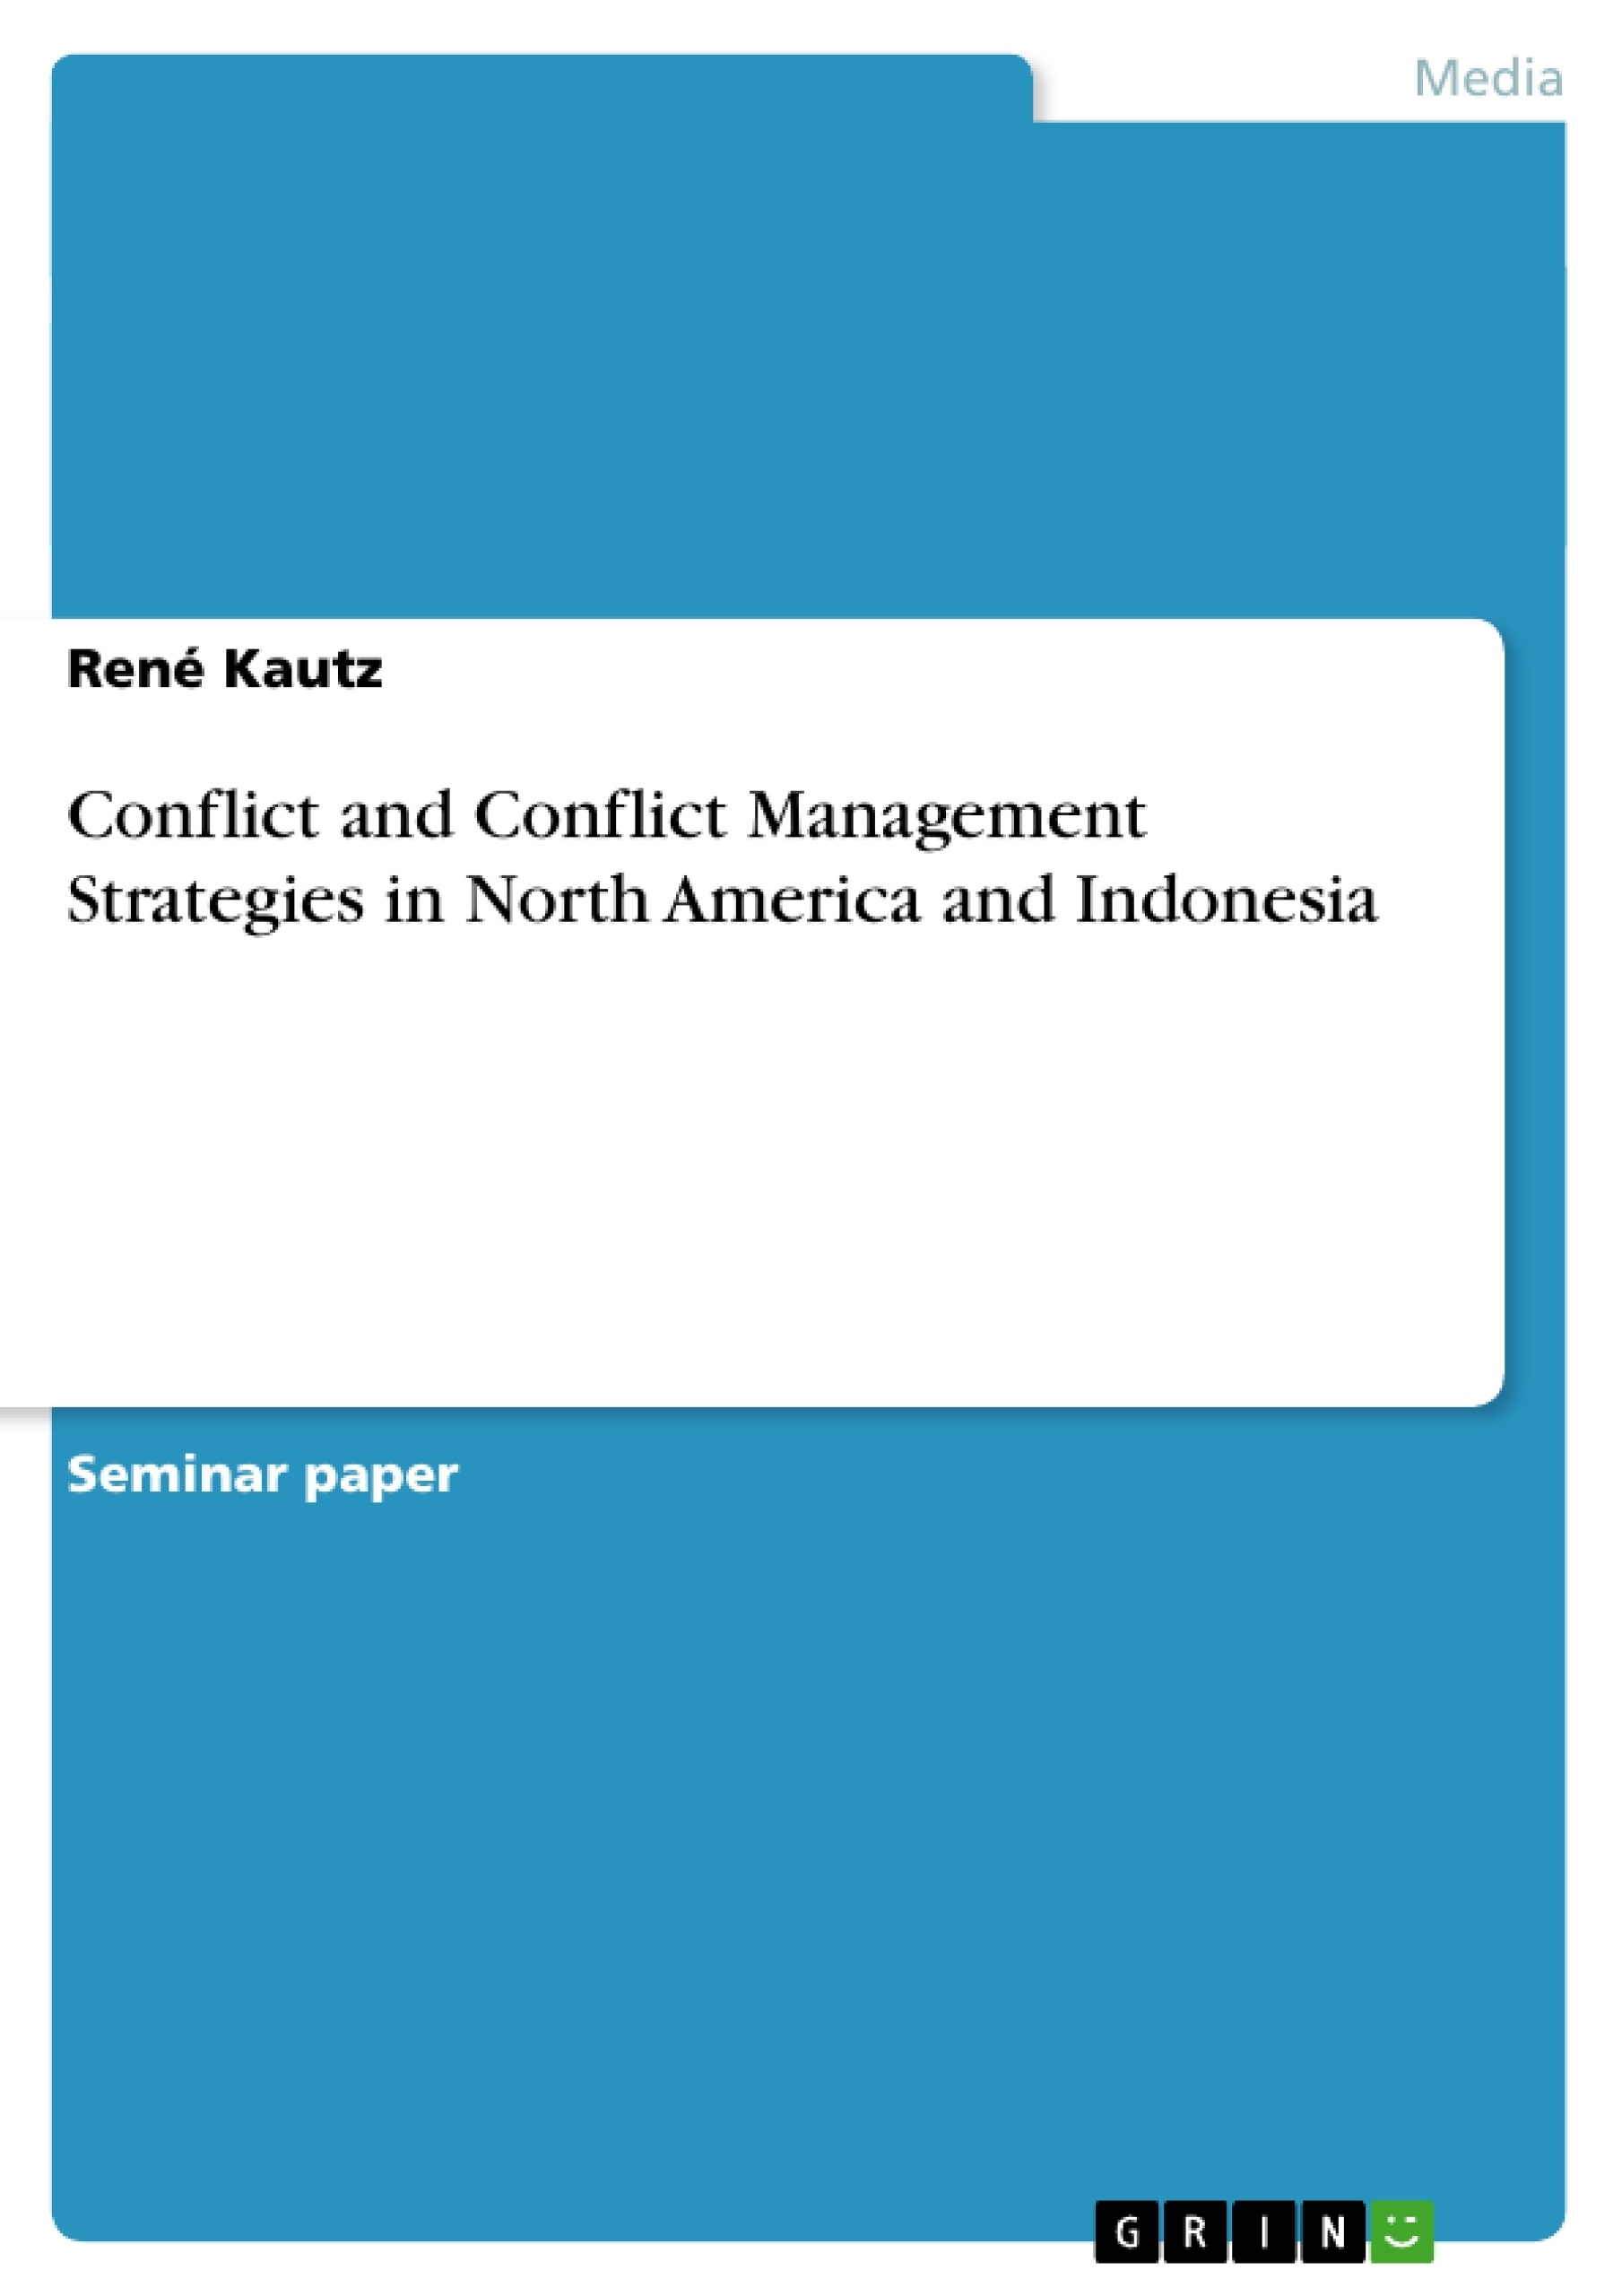 Title: Conflict and Conflict Management Strategies in North America and Indonesia